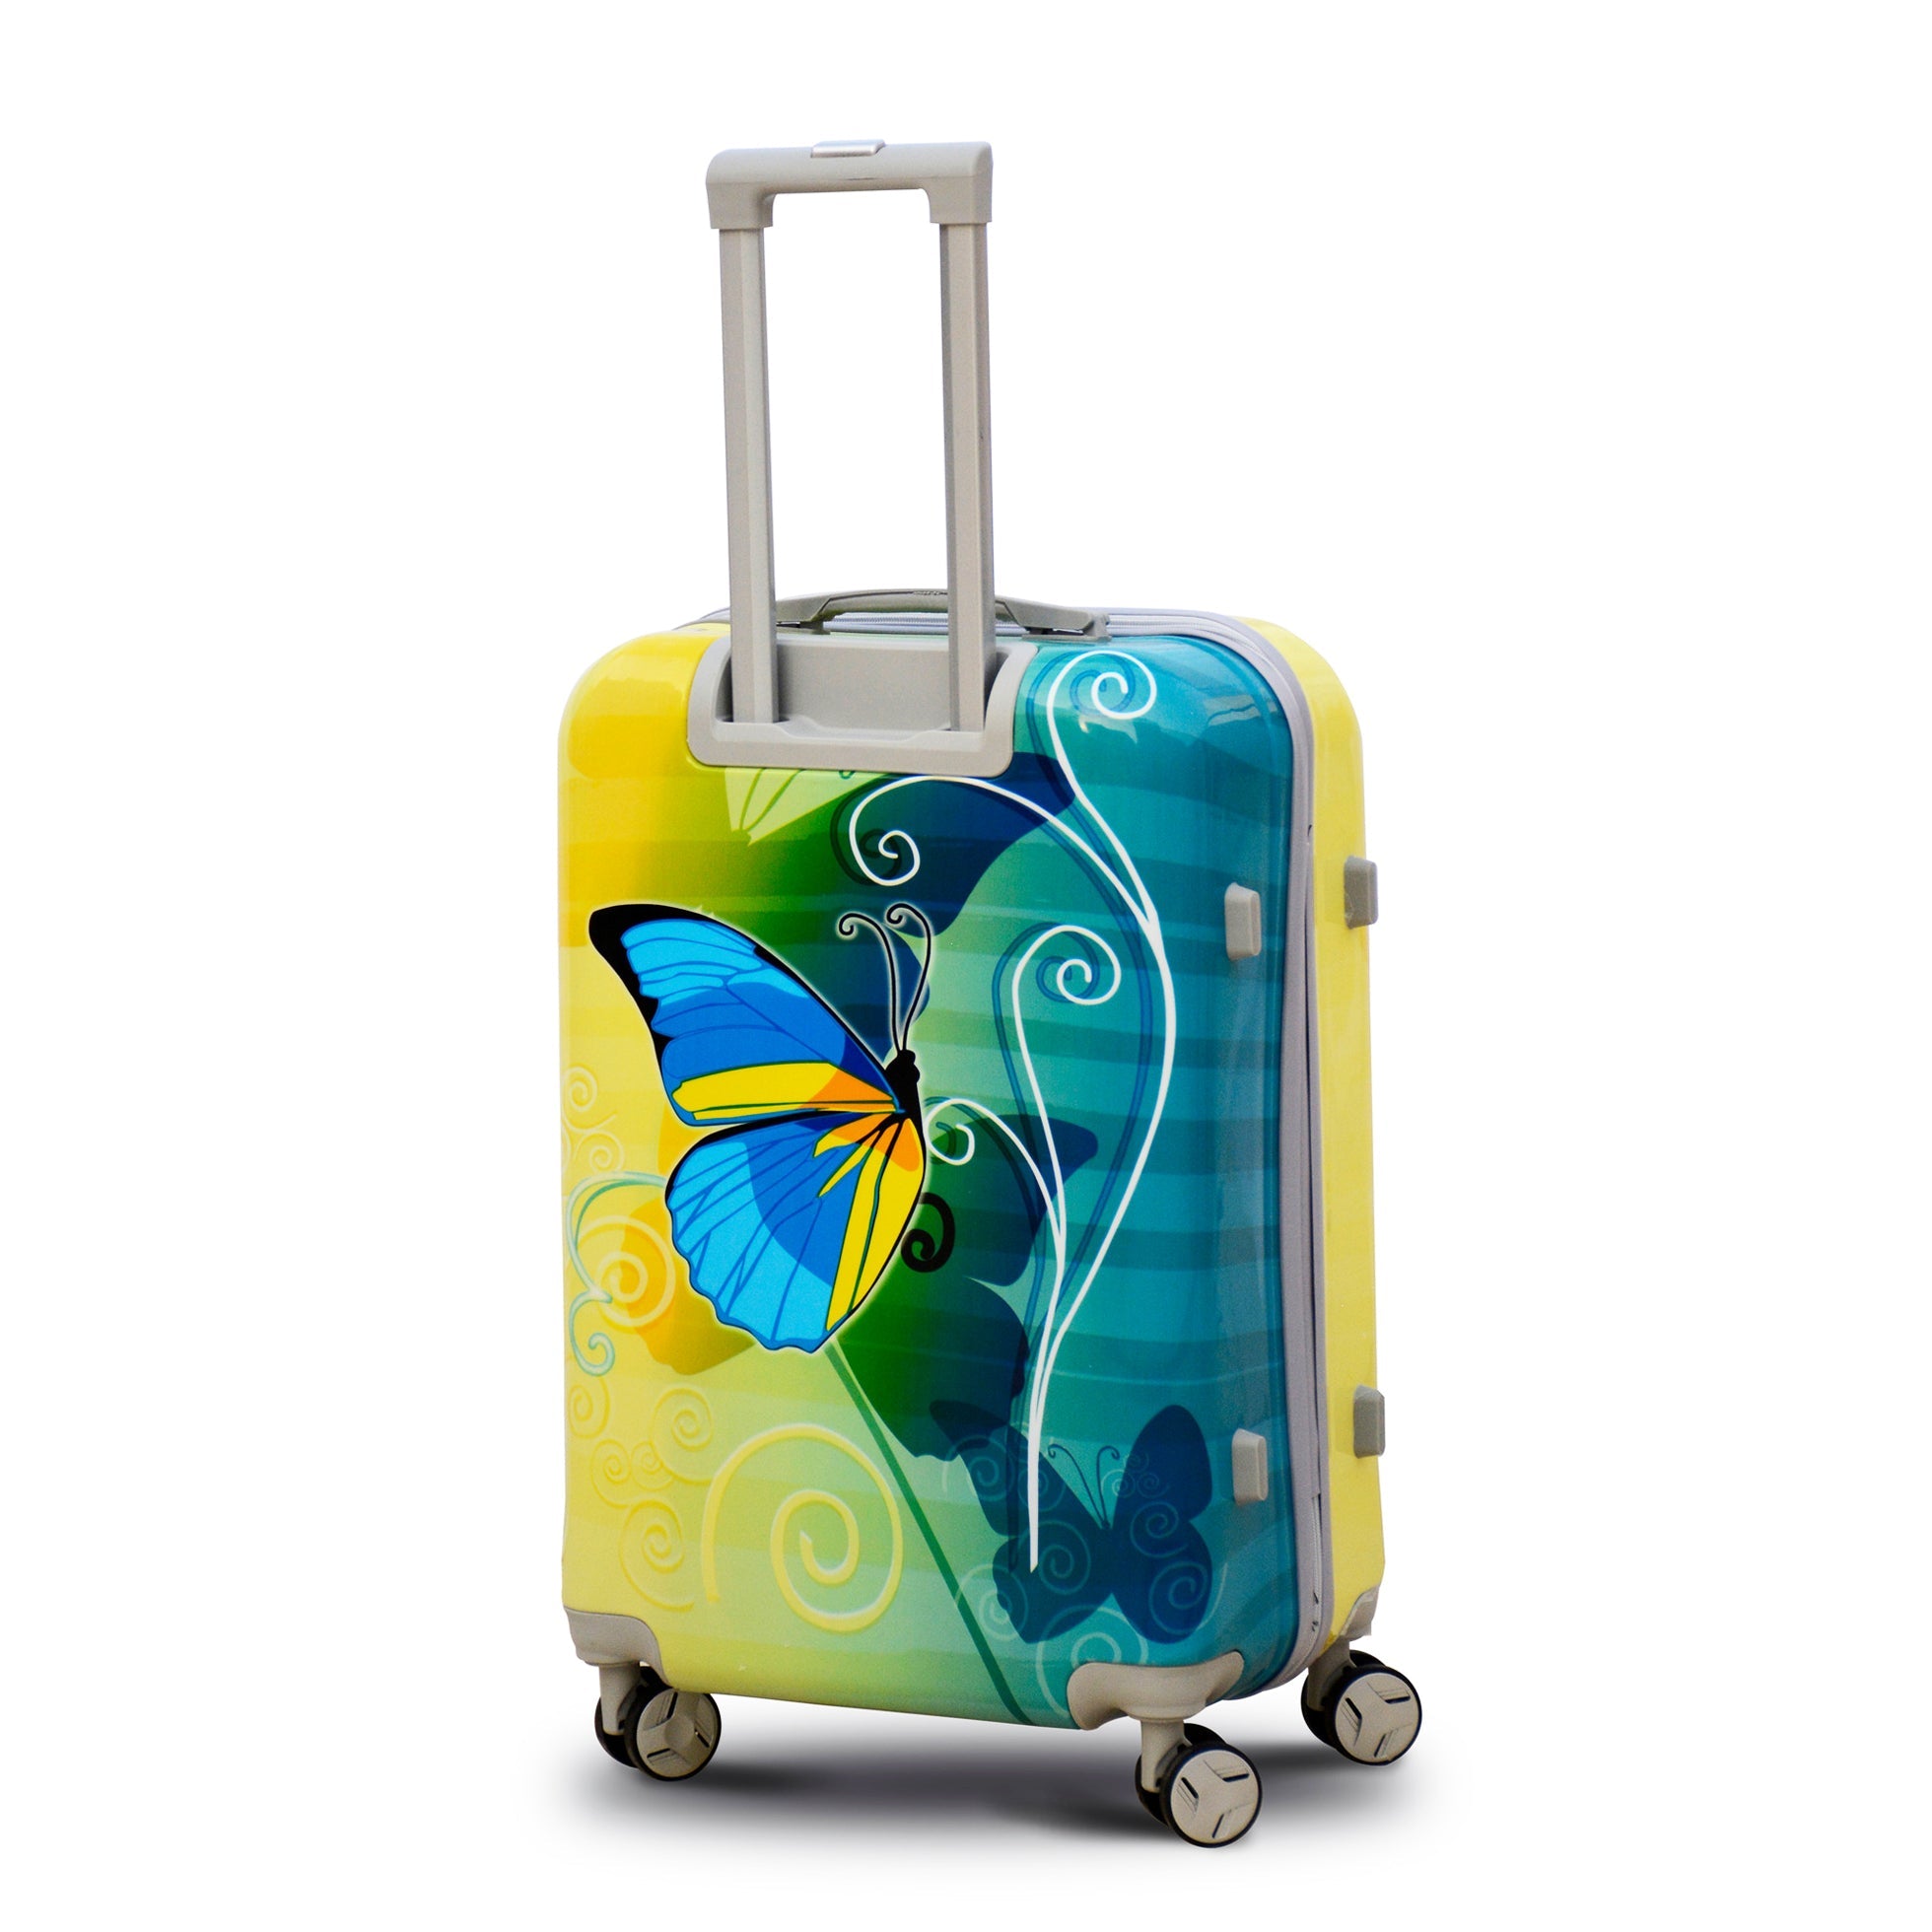 24" Green Colour Printed Butterfly Lightweight ABS Luggage | Hard Case Trolley Bag